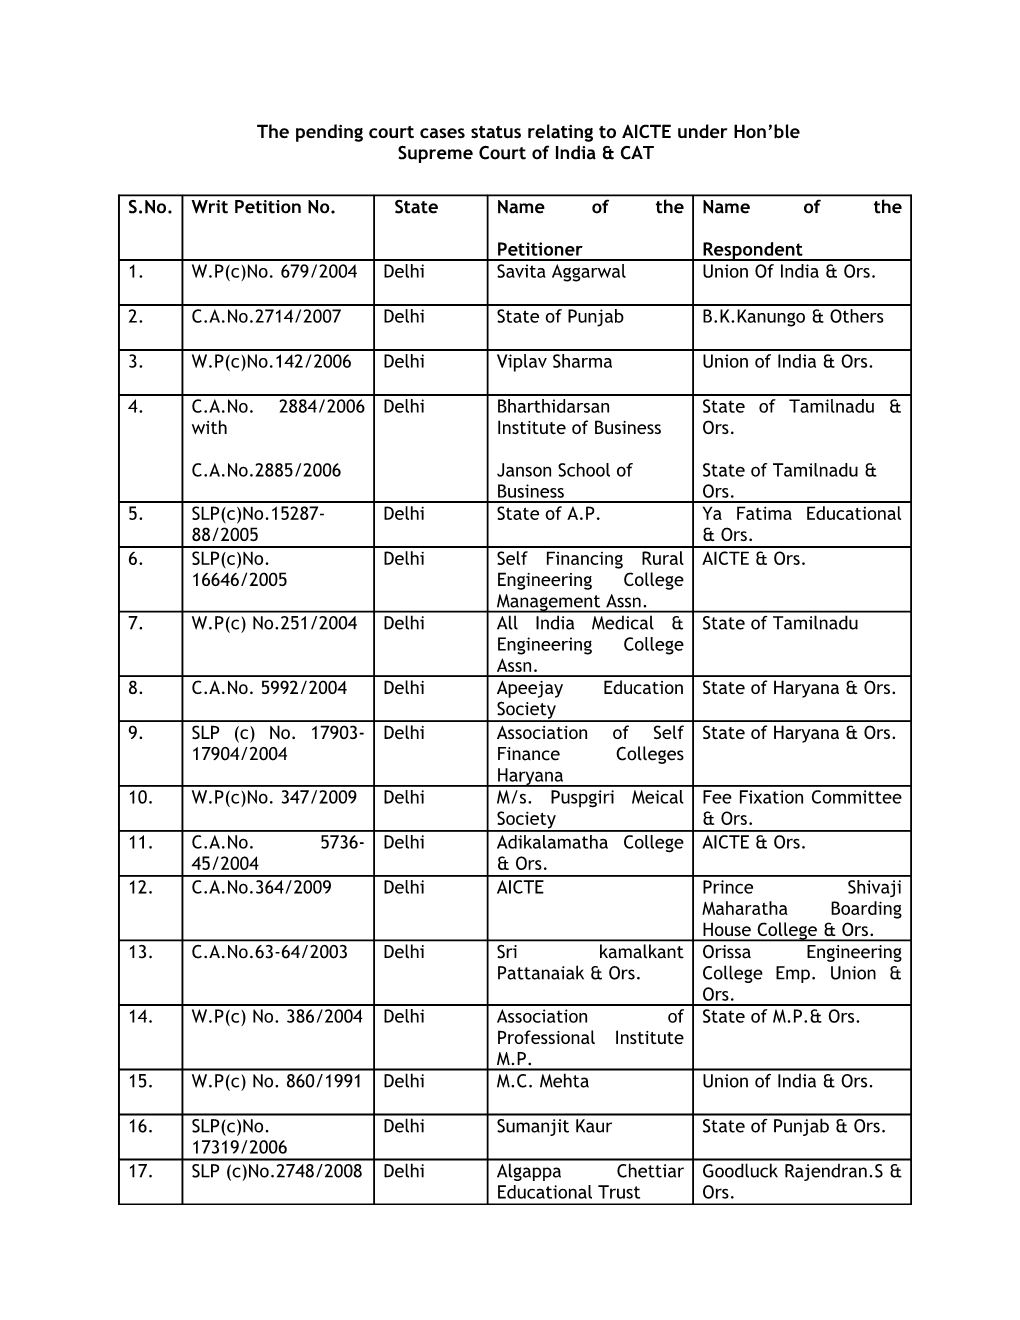 The Pending Court Cases Status Relating to AICTE Under Hon Ble